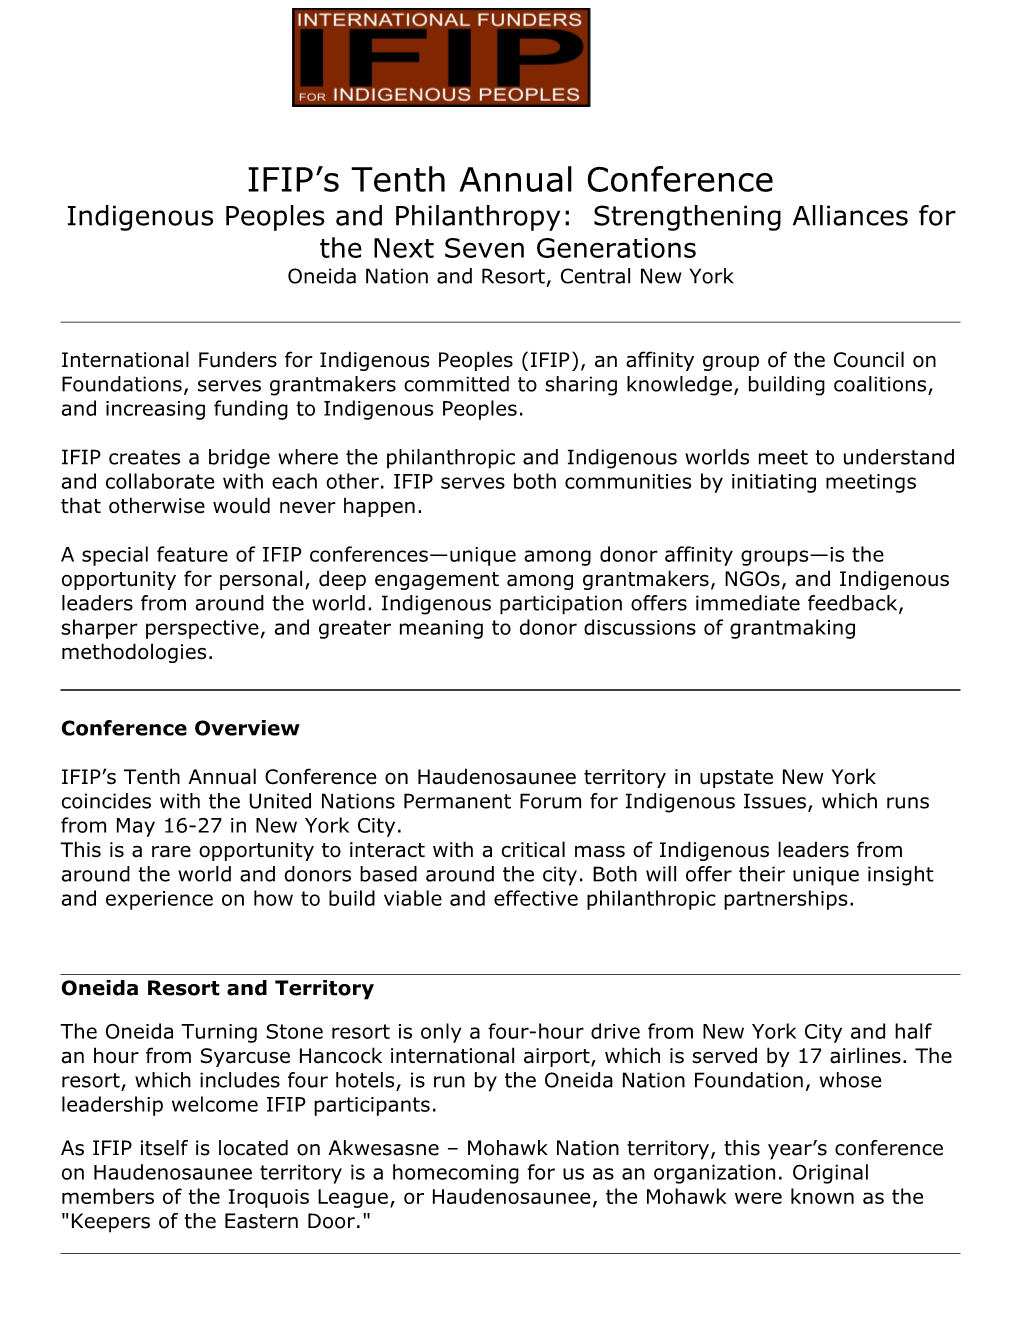 IFIP S Tenth Annual Conference